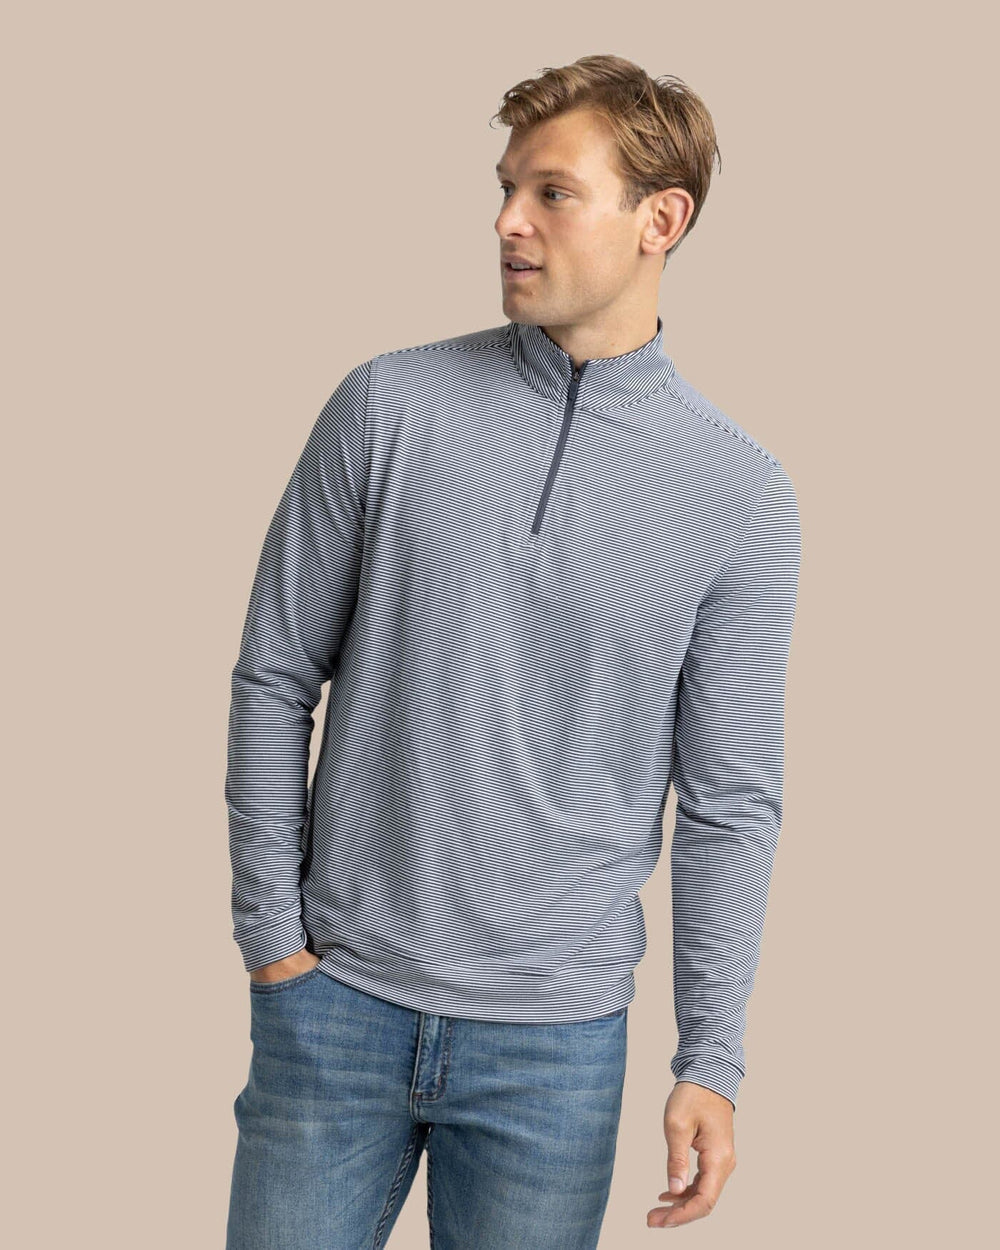 The second front view of the Southern Tide Cruiser Micro-Stripe Heather Quarter Zip by Southern Tide - Heather Black